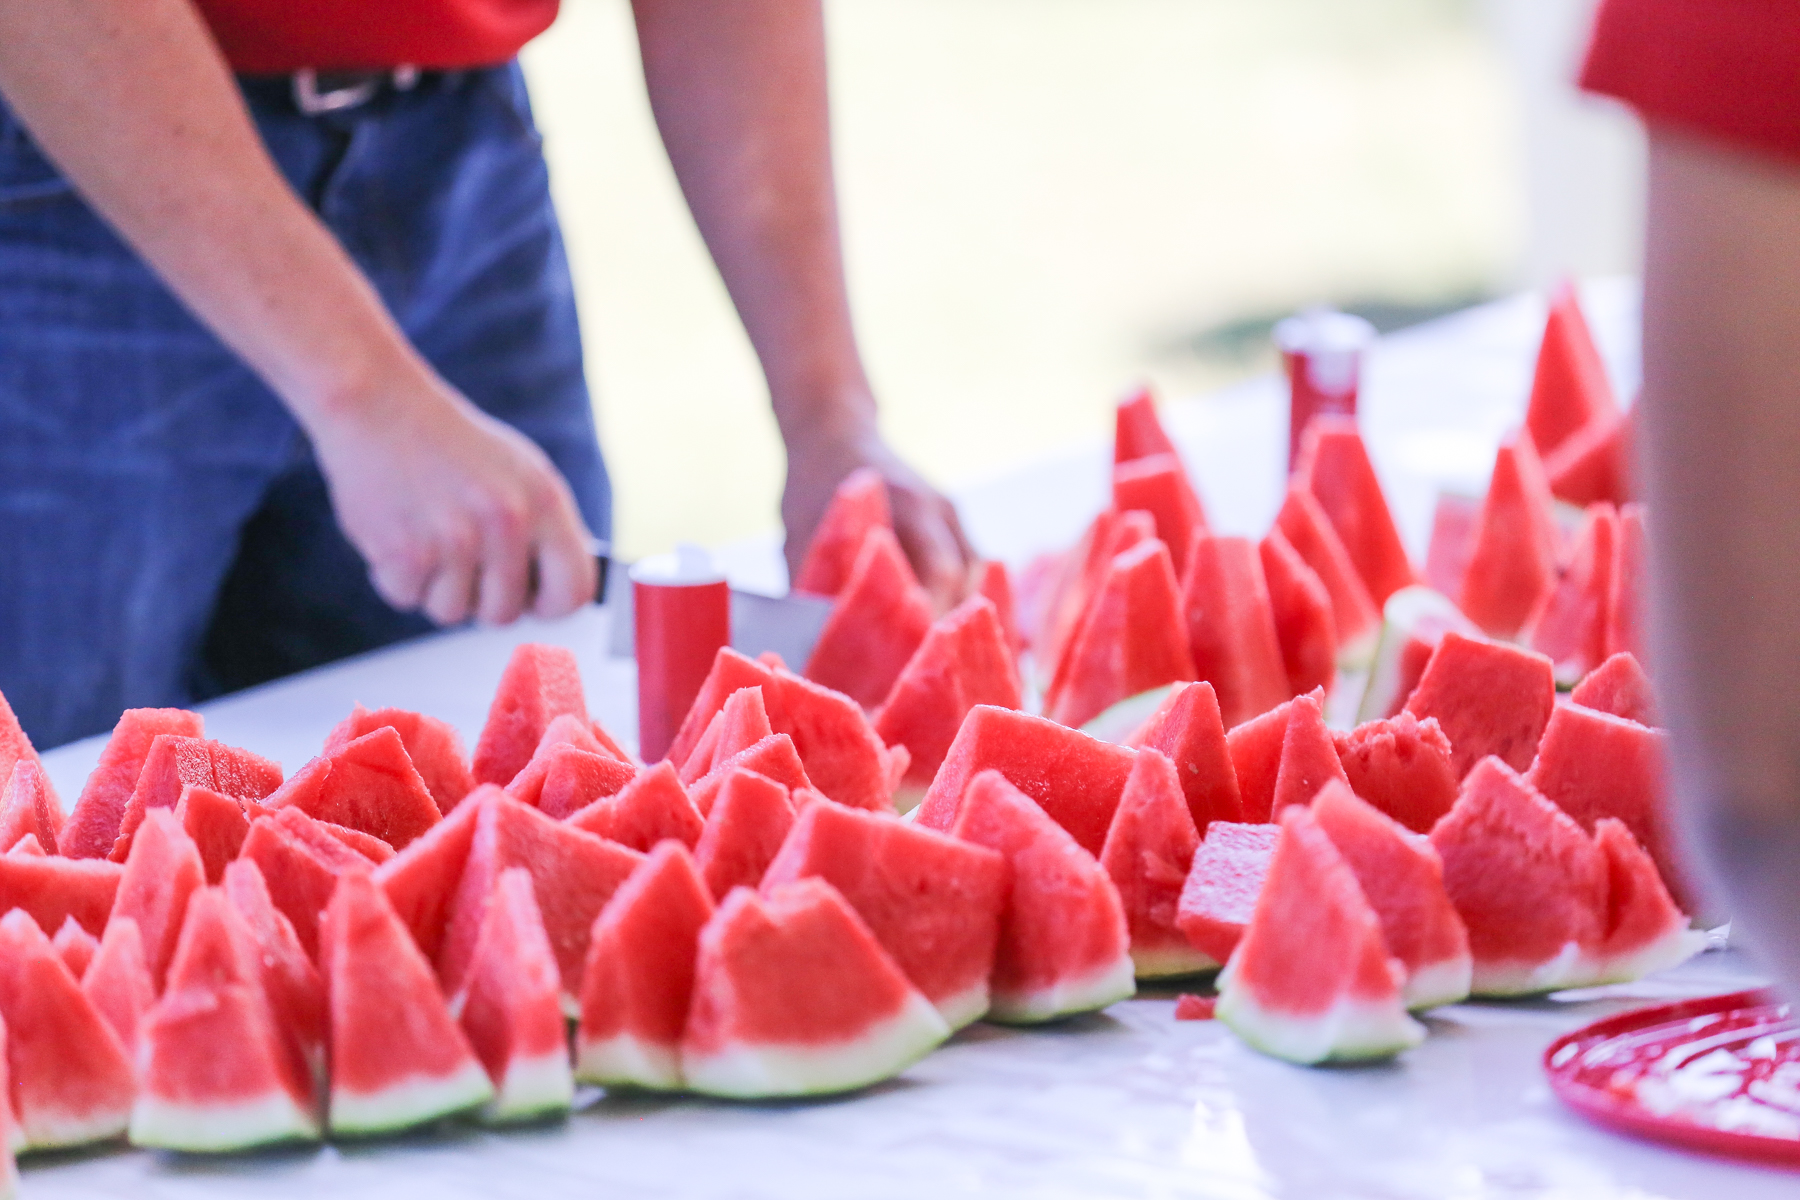 watermelon slices on a table